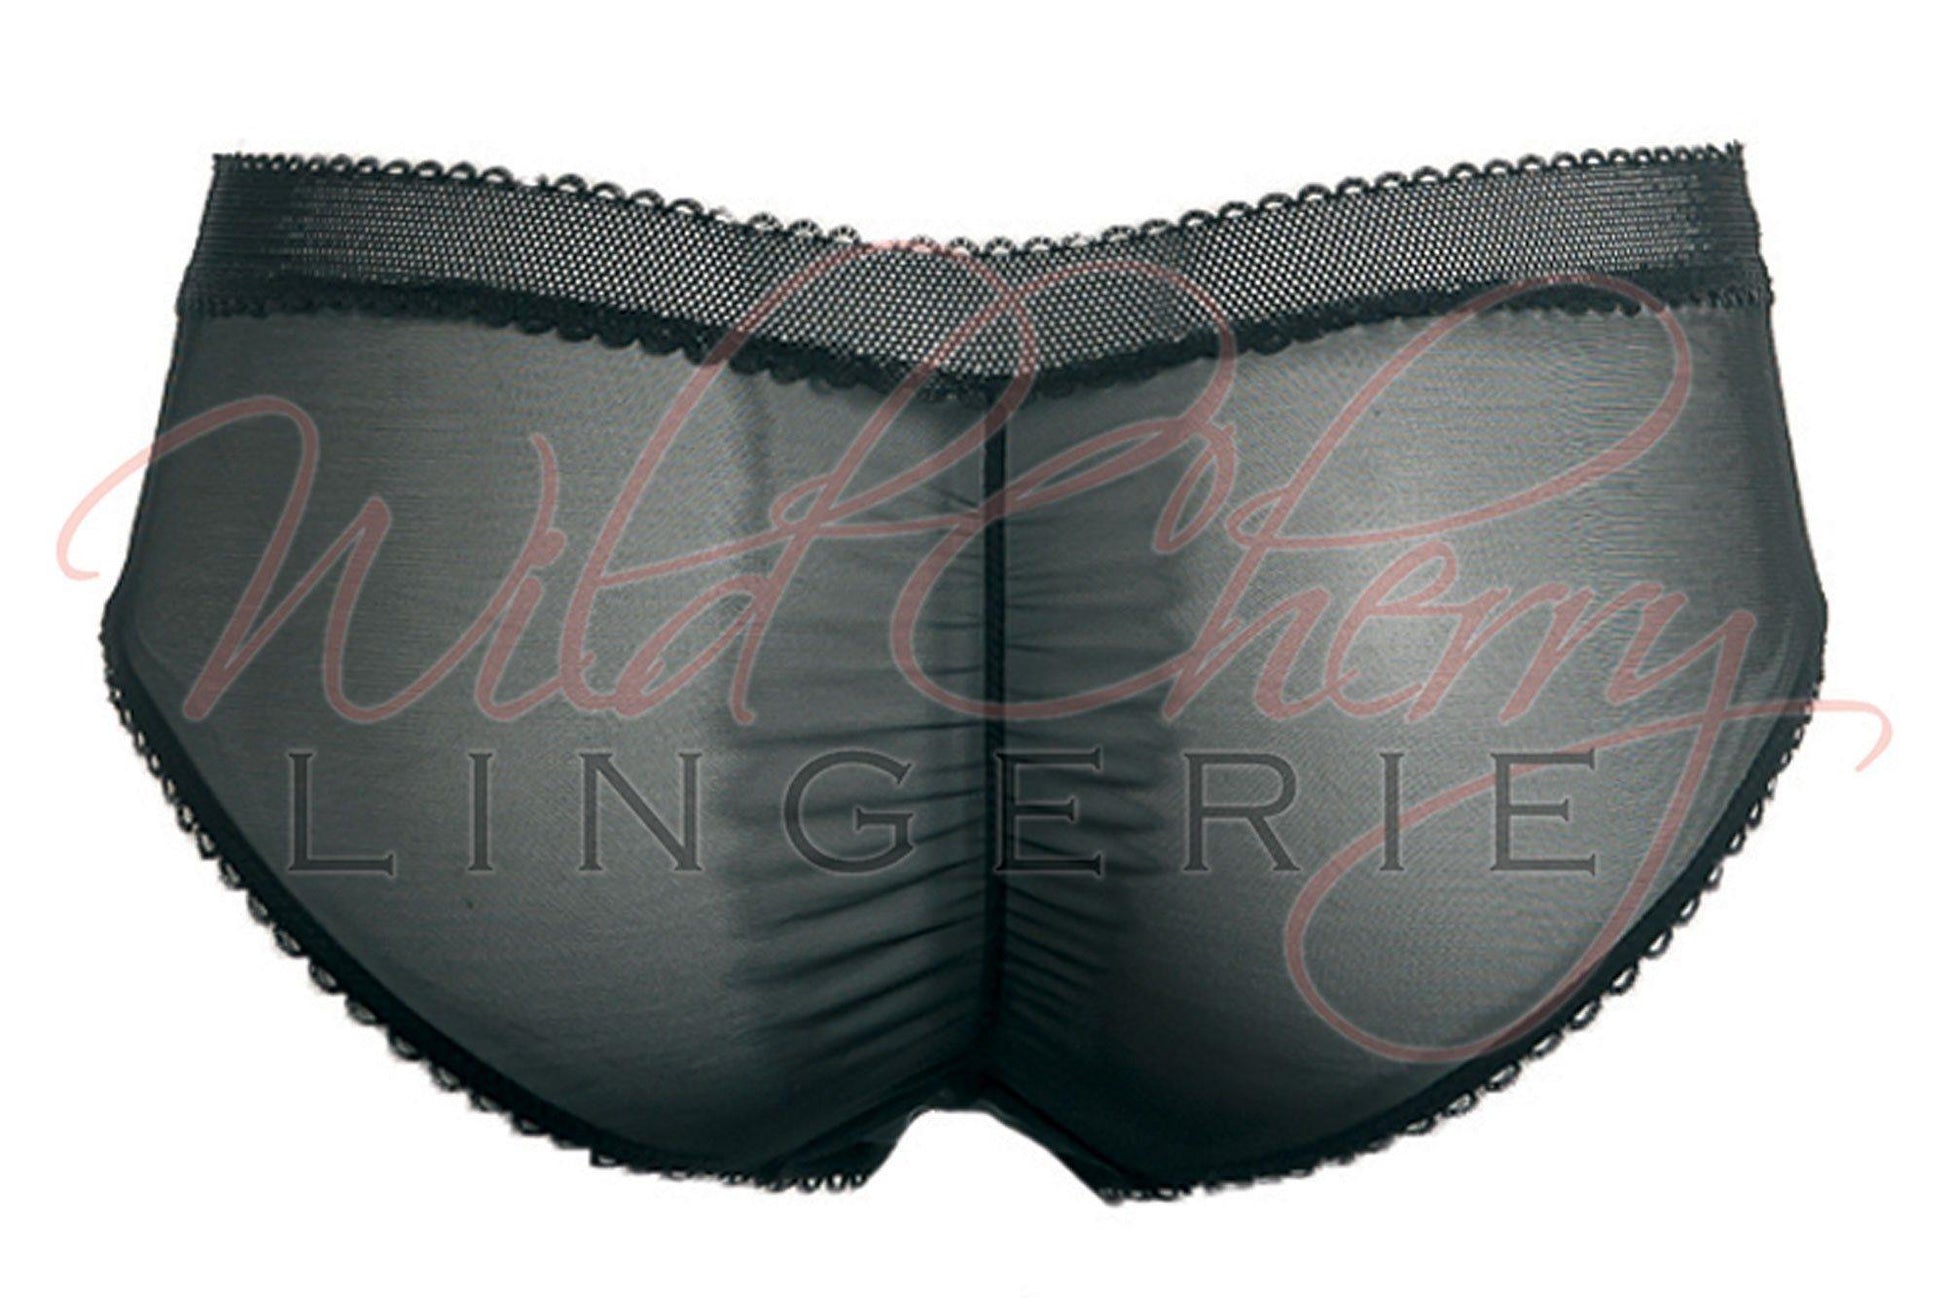 Hilton Collection Hipster Panty VIPA Lingerie, Panties, VIPA Lingerie - Wild Cherry Lingerie